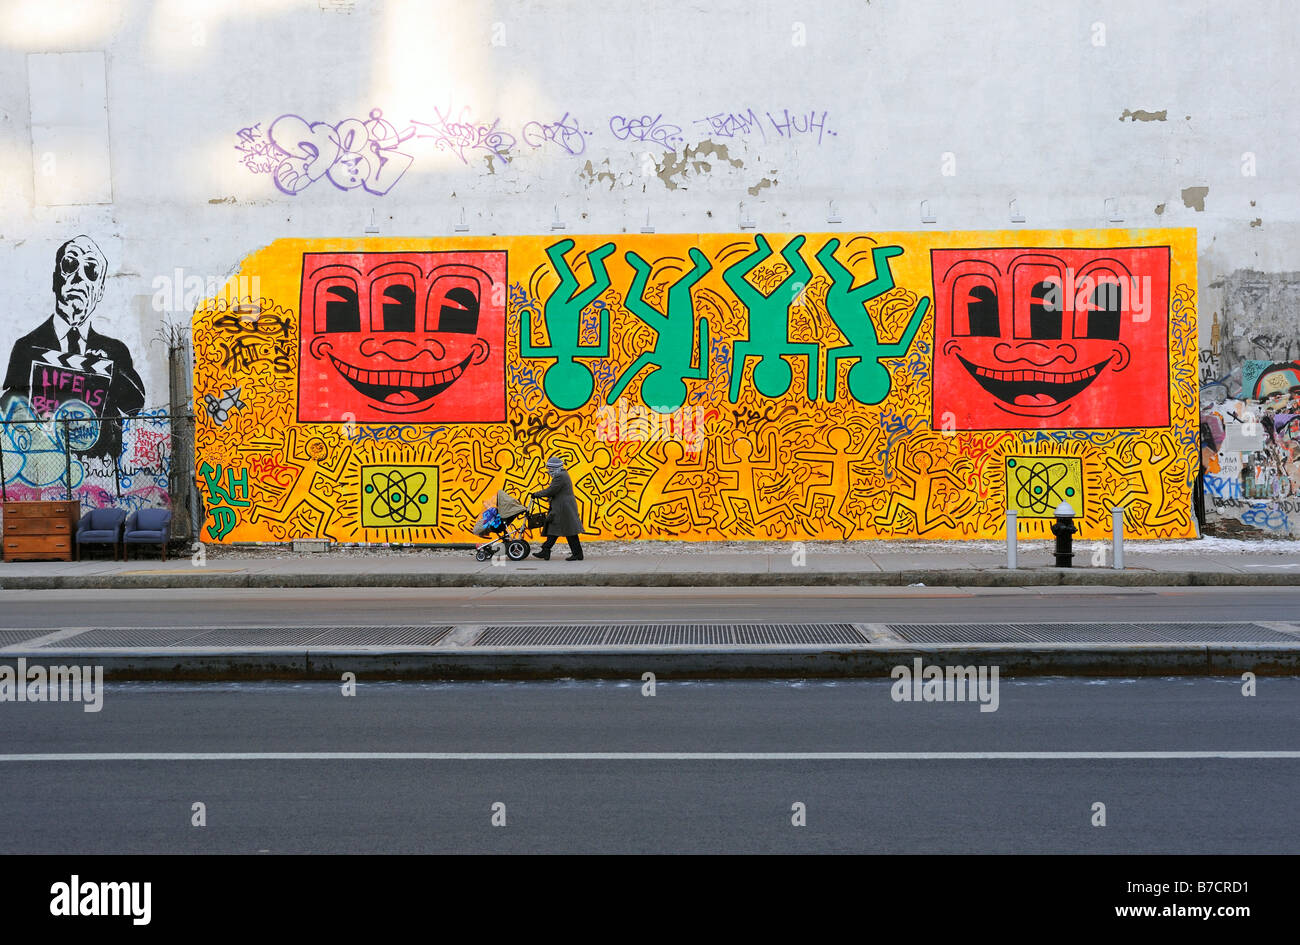 The recreation of Keith Haring's mural at Houston Street and the Bowery in NYC Stock Photo